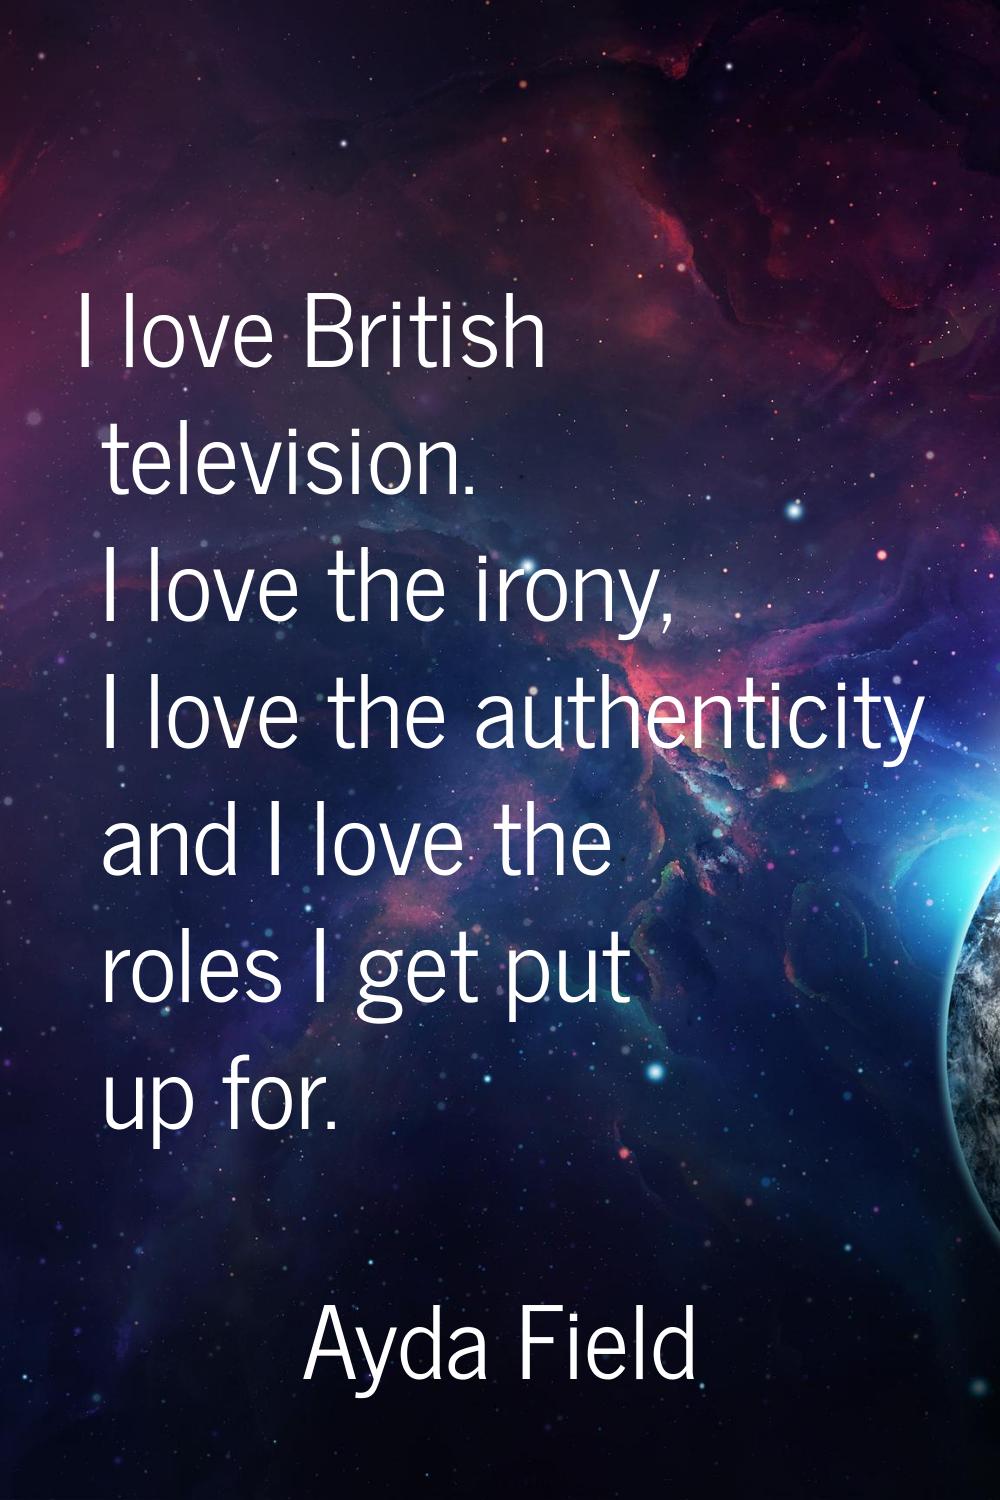 I love British television. I love the irony, I love the authenticity and I love the roles I get put